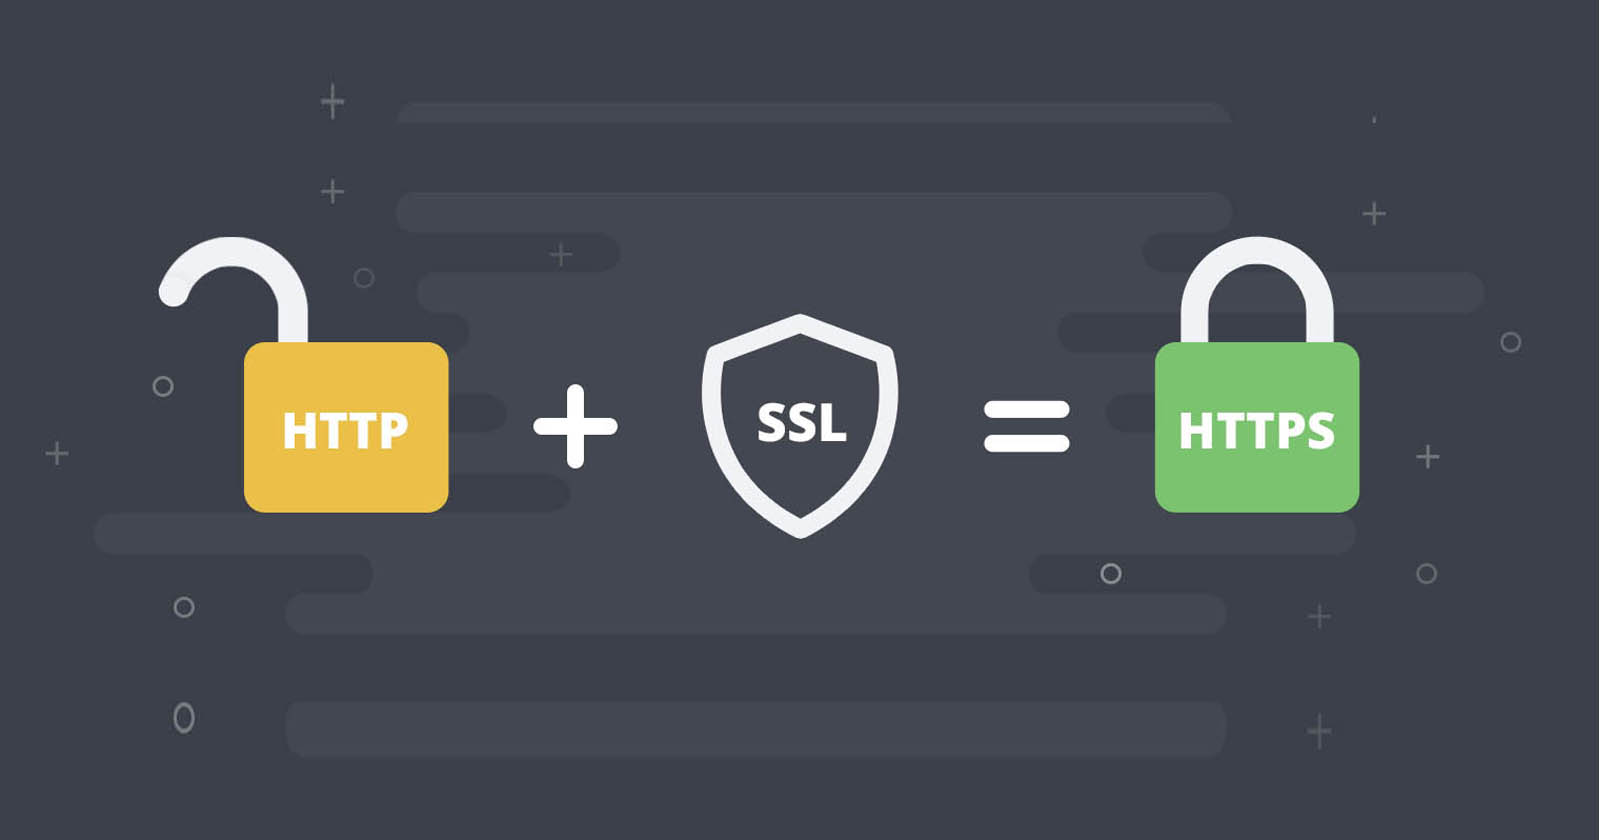 switch to HTTPS